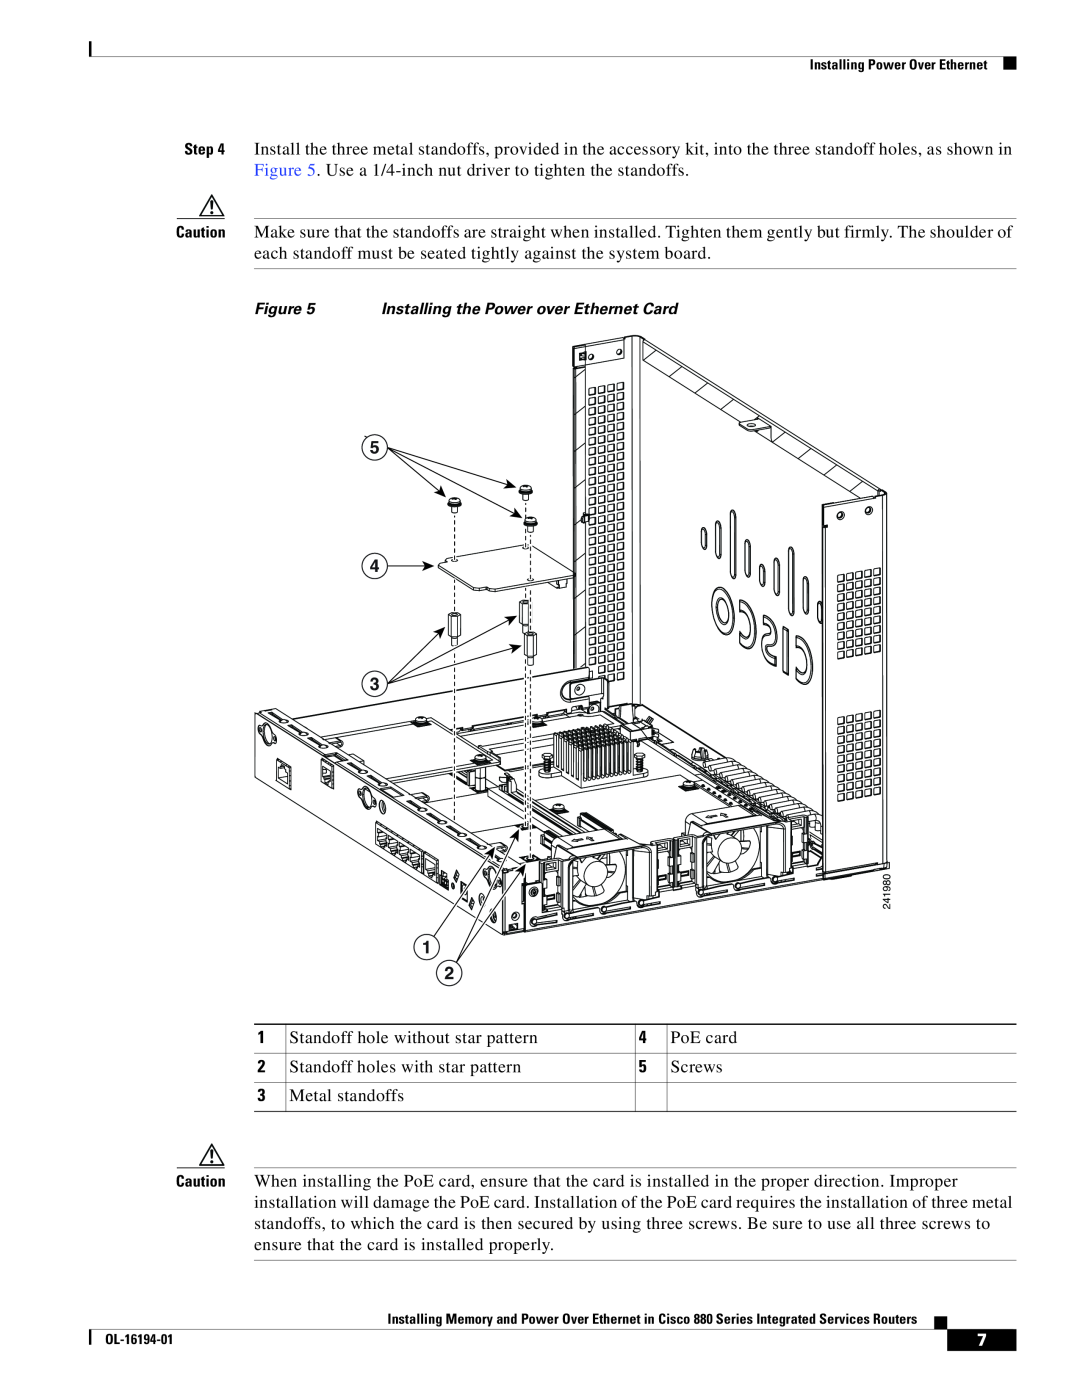 Cisco Systems 880 Series manual Installing the Power over Ethernet Card 